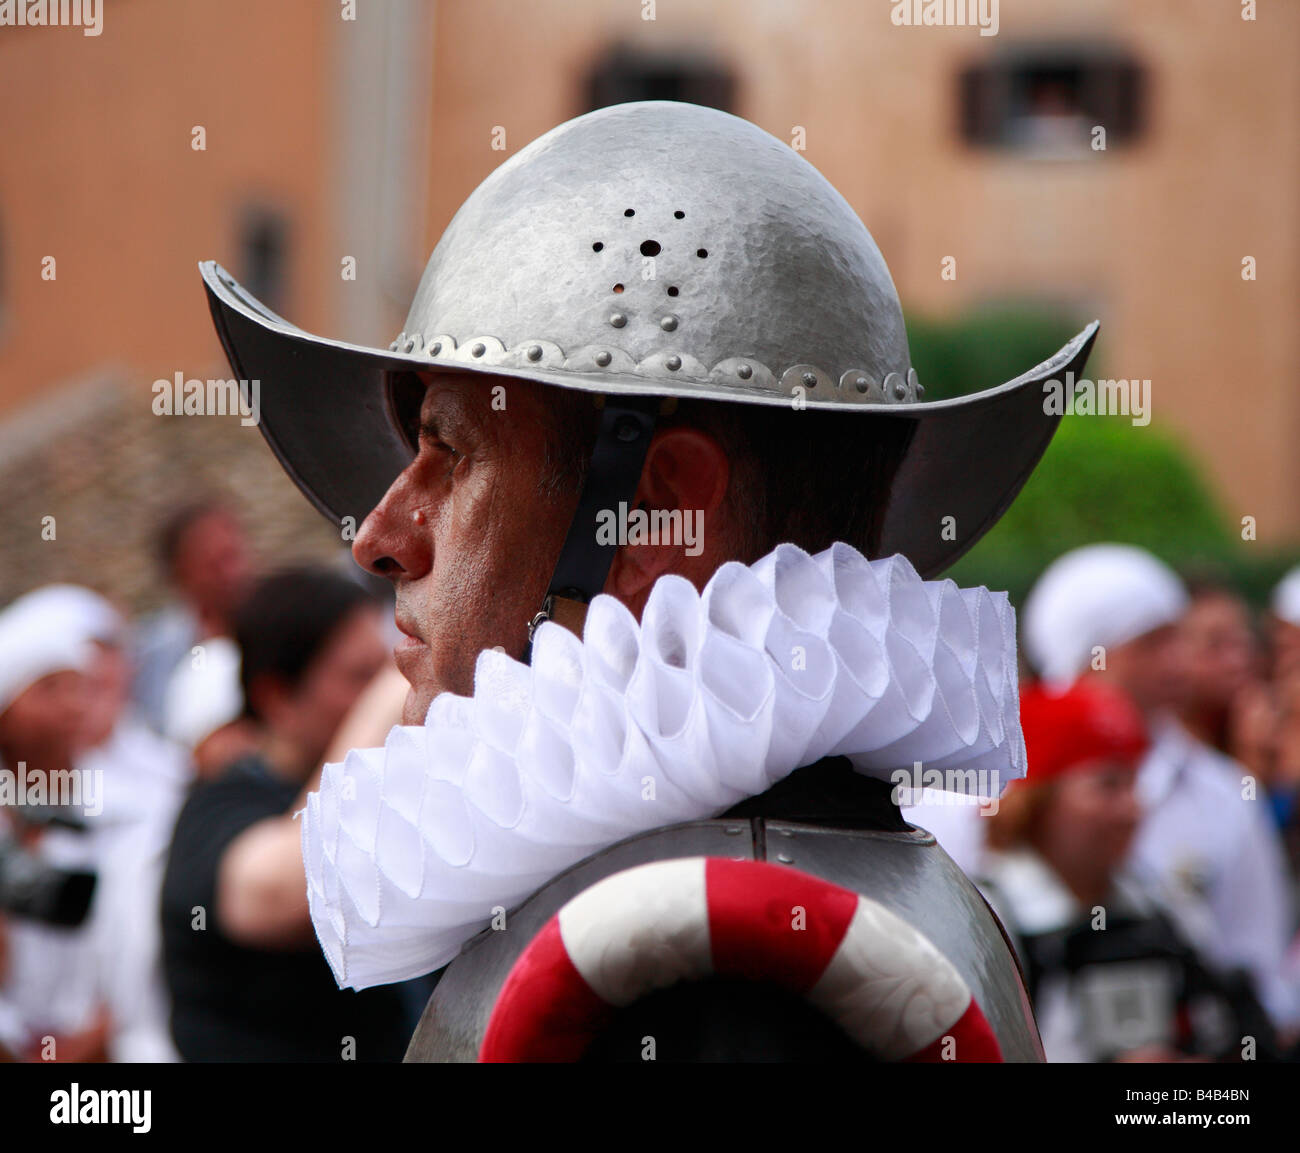 man in historical parade wearing 15th century conquistador costume Stock Photo